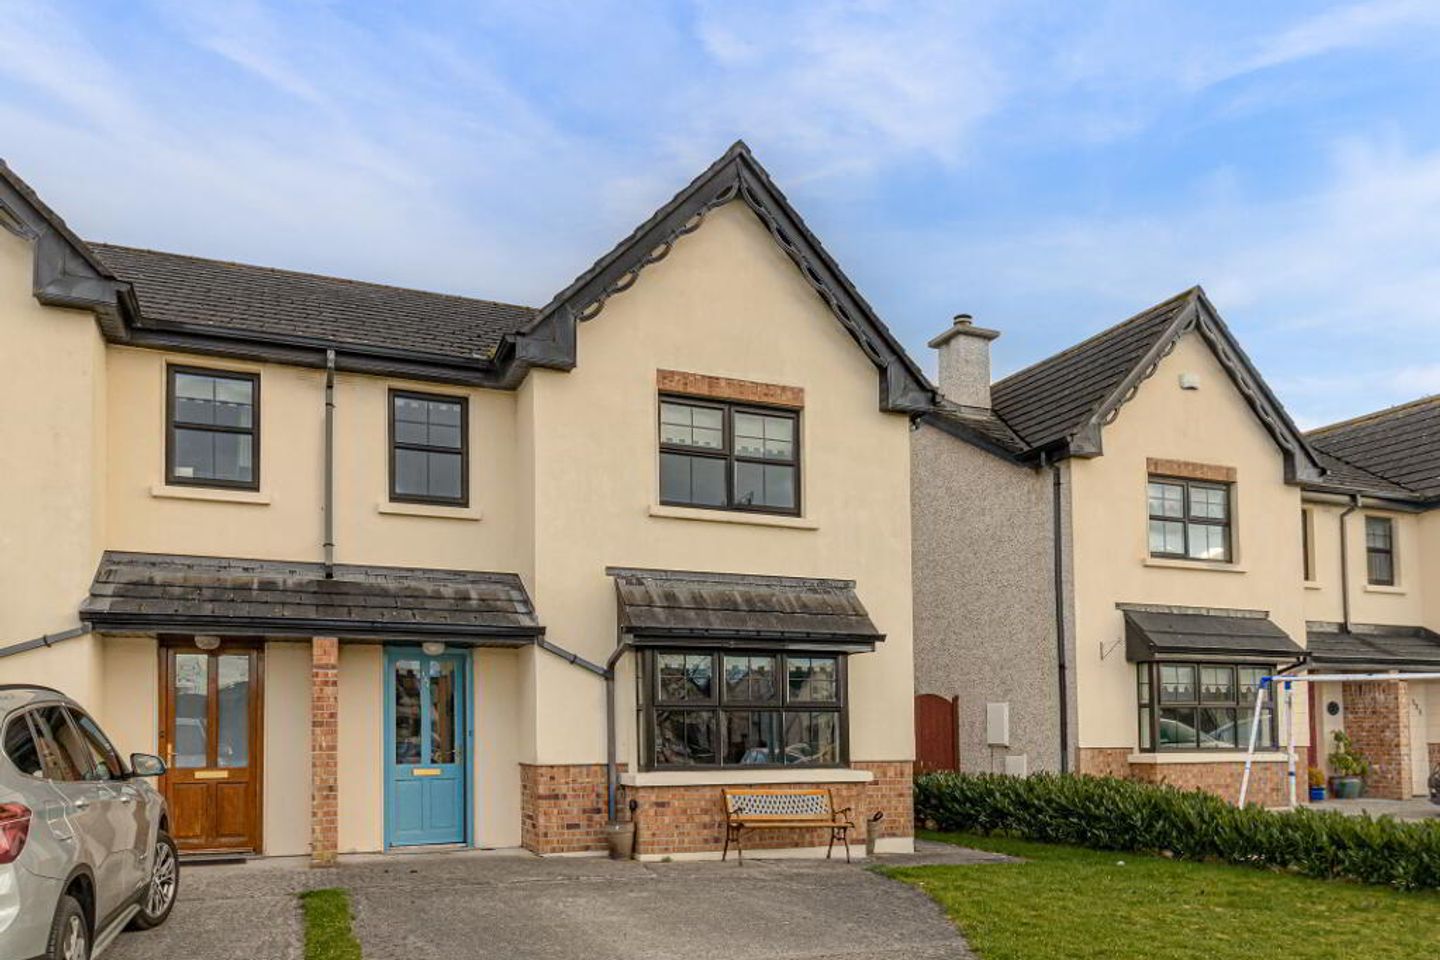 Crossneen Manor, 127 Leighlin Road, Carlow Town, Co. Carlow